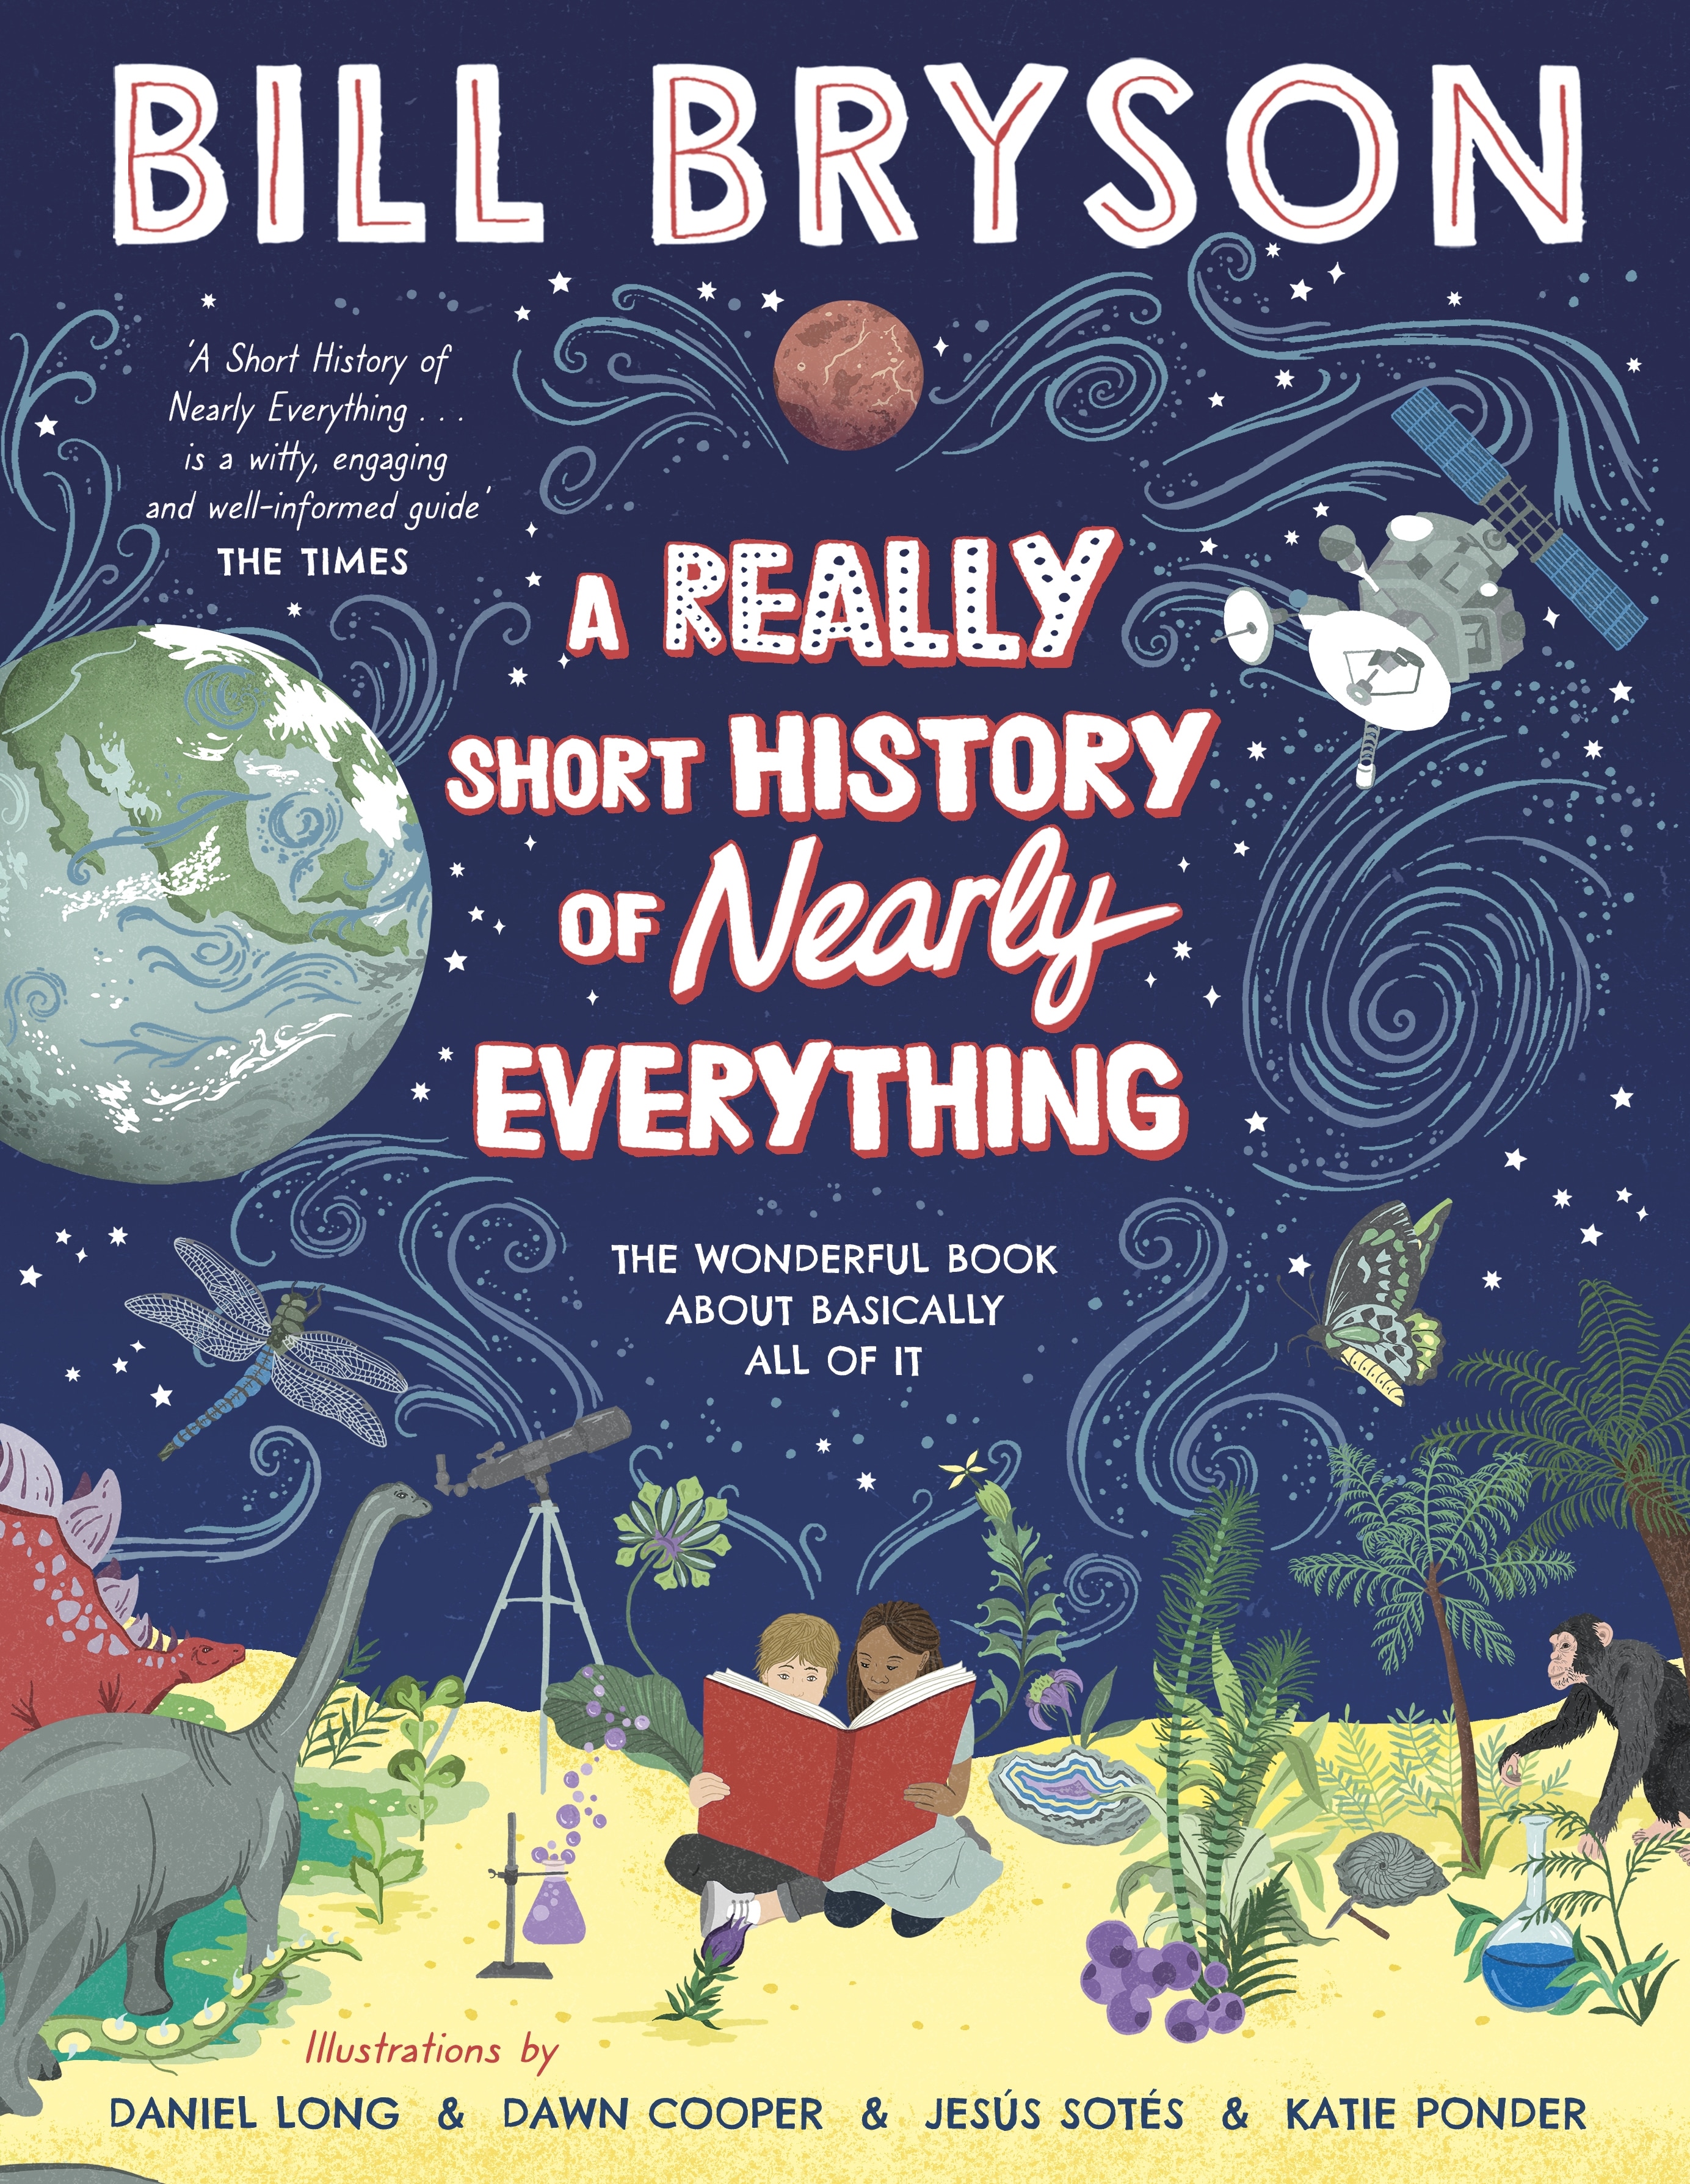 Book “A Really Short History of Nearly Everything” by Bill Bryson — October 29, 2020